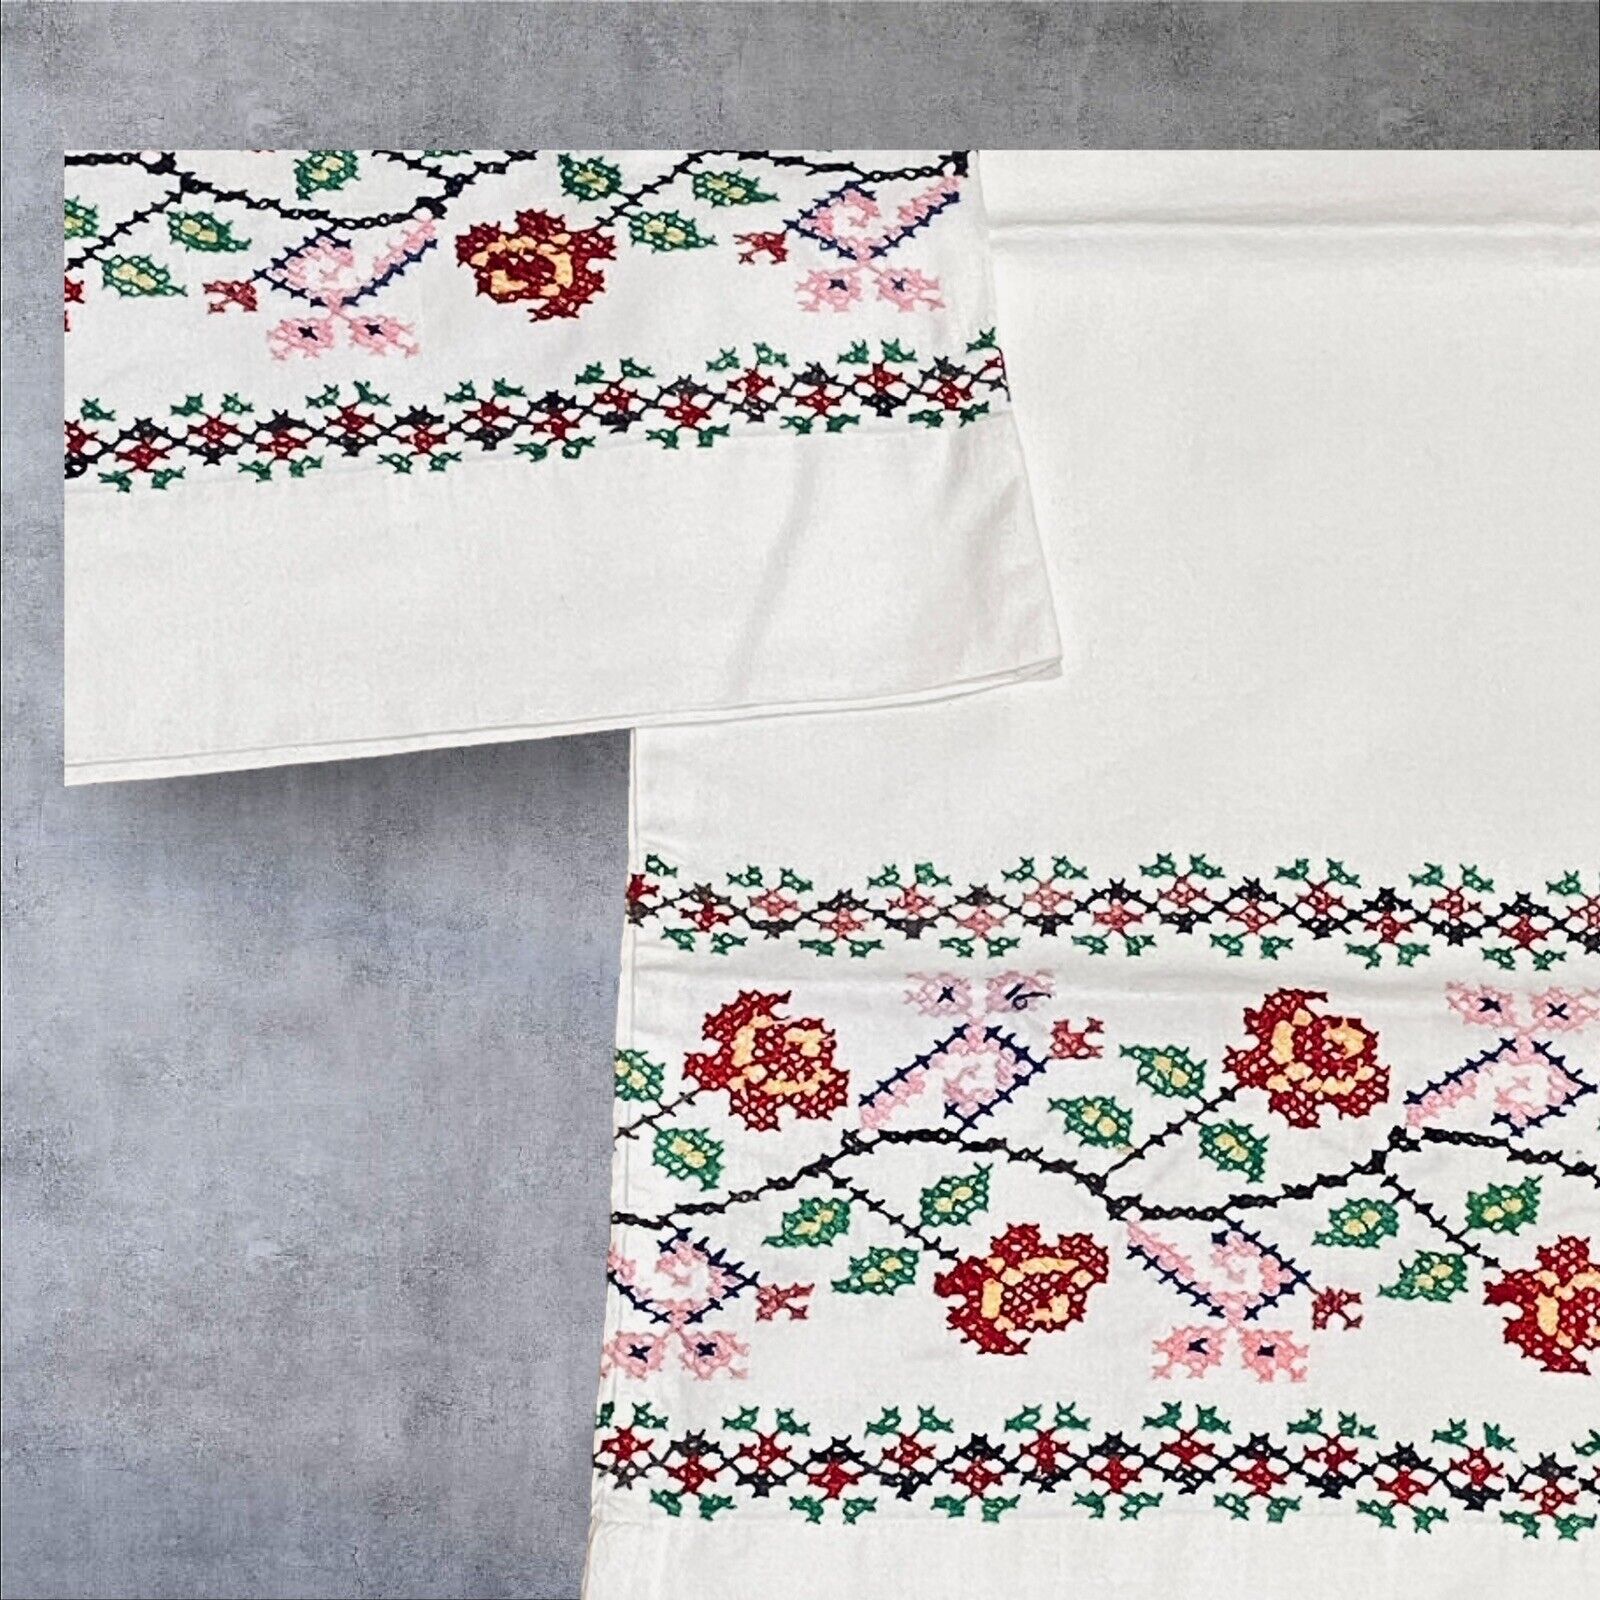 Two Queen Pillowcases Cross Stitched by Hand Floral Vintage Bright and White